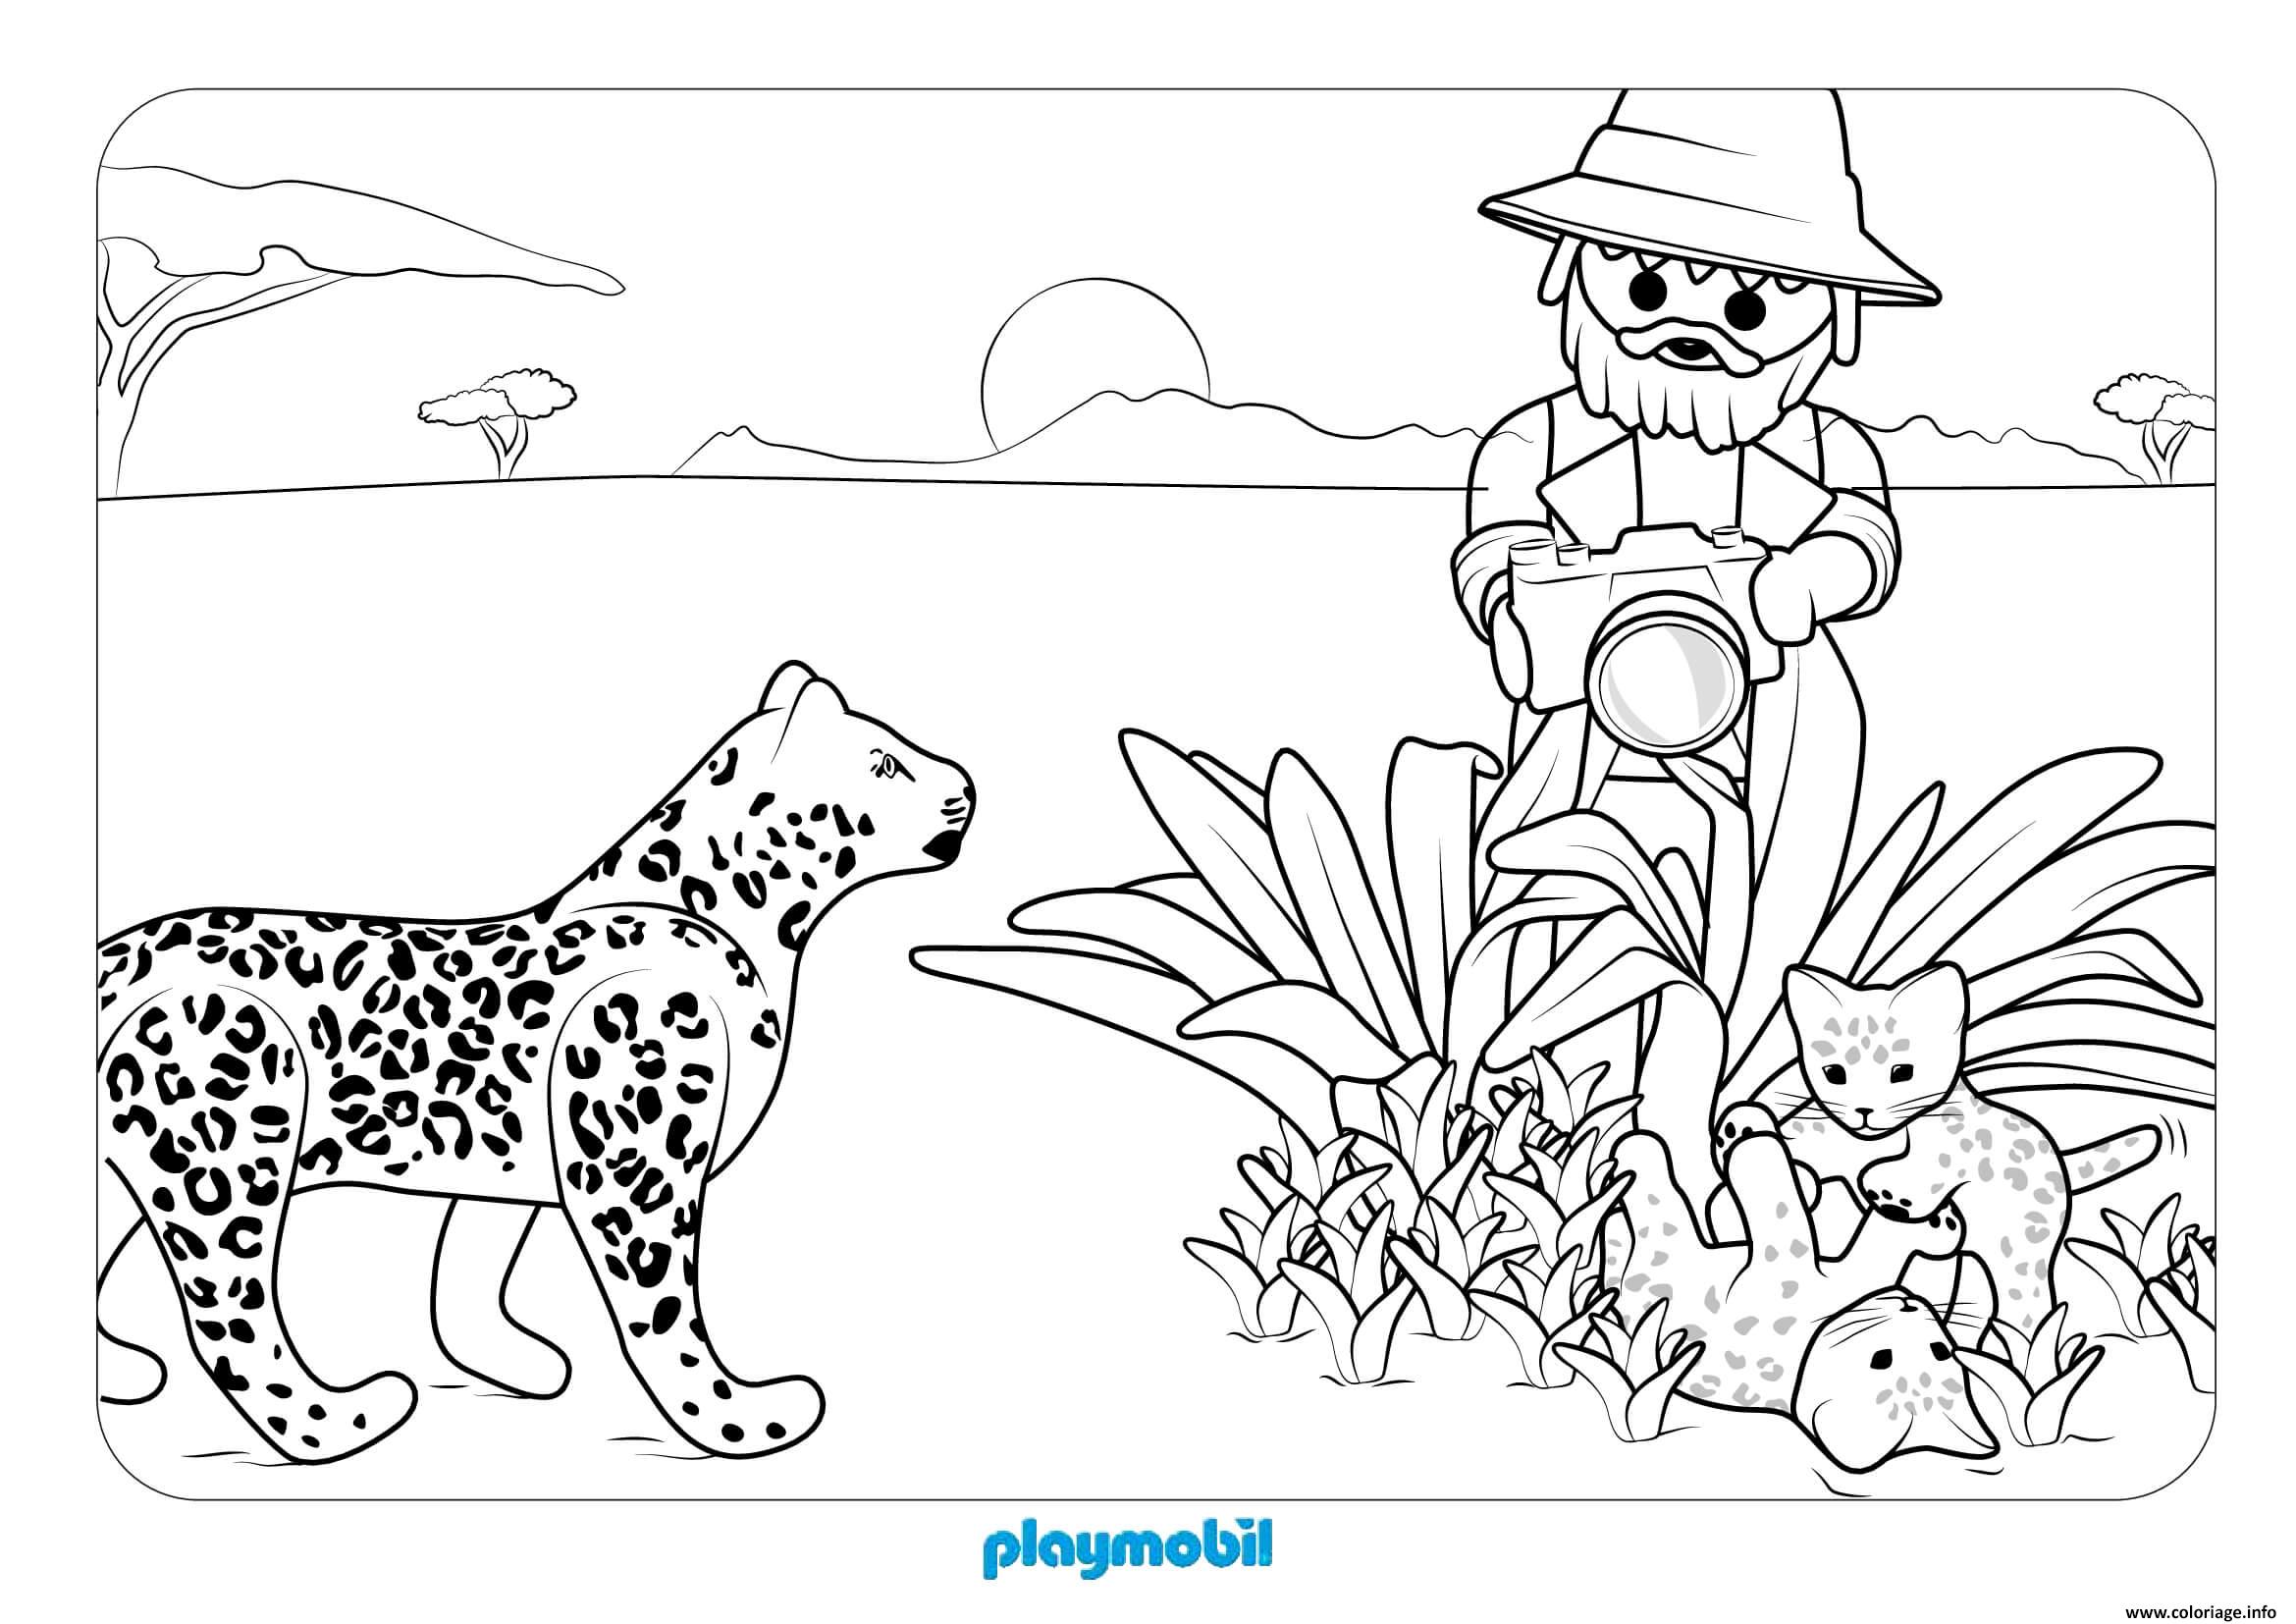 Coloriage animaux sauvages 3 - JeColorie.com